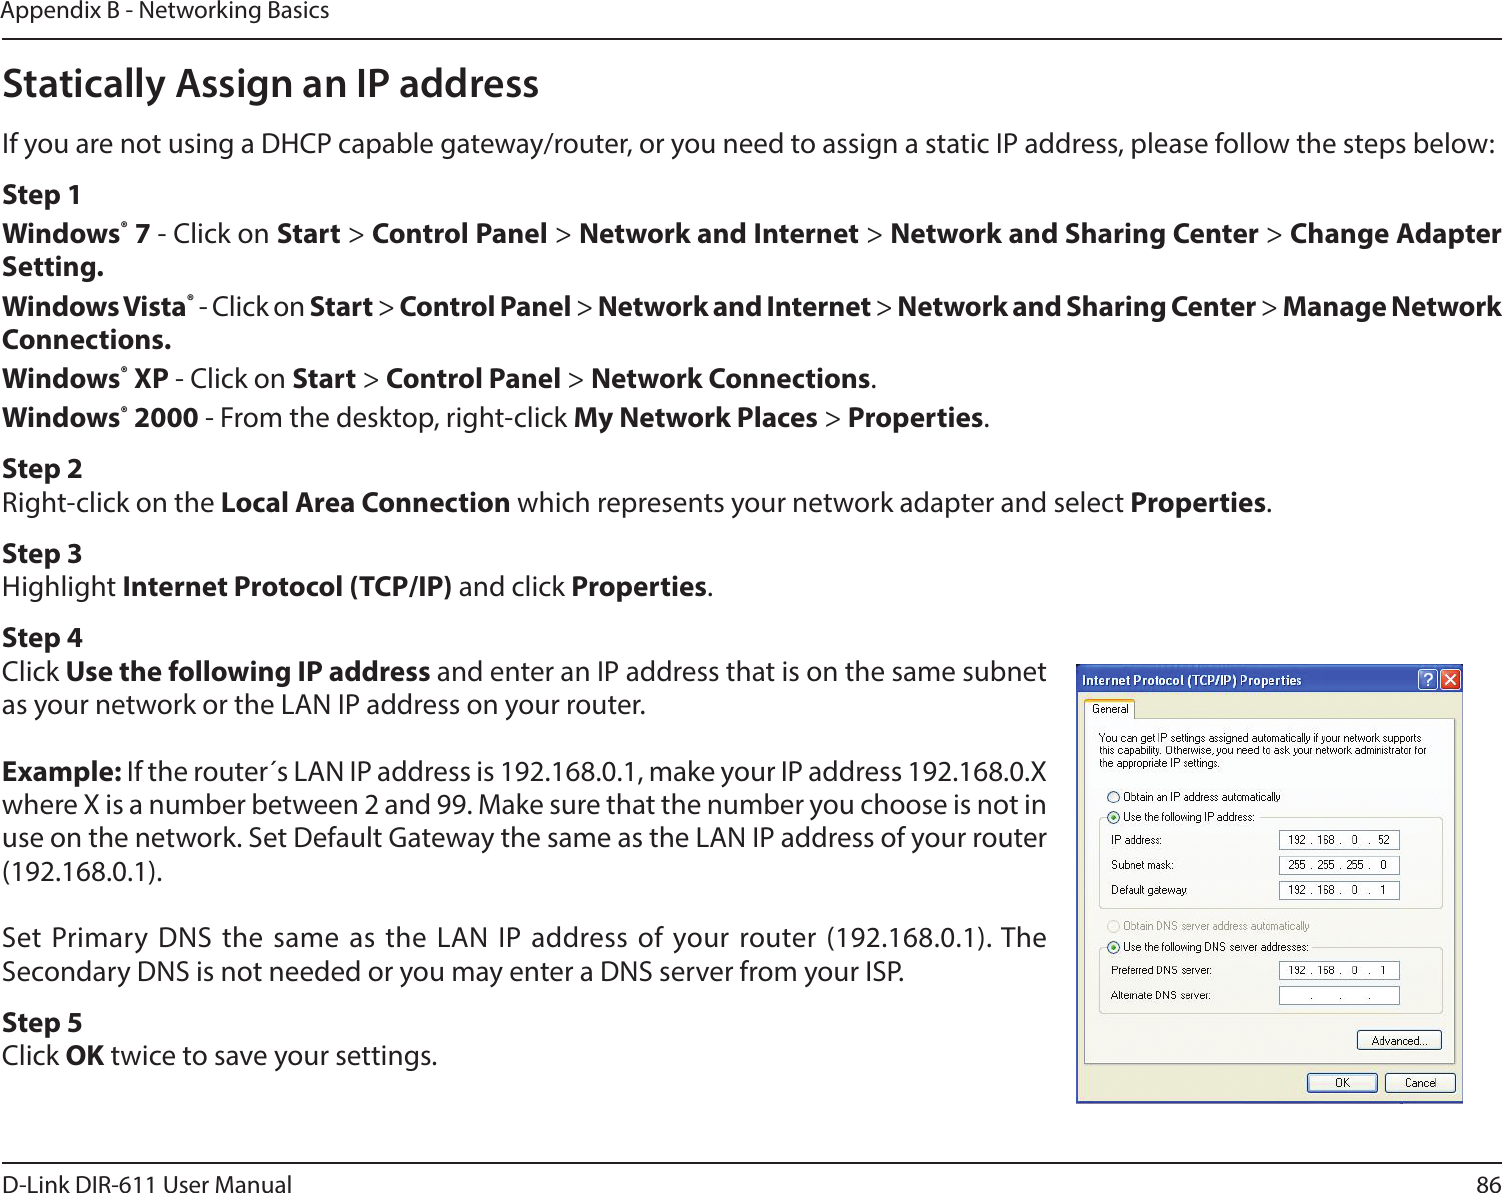 86D-Link DIR-611 User ManualAppendix B - Networking BasicsStatically Assign an IP addressIf you are not using a DHCP capable gateway/router, or you need to assign a static IP address, please follow the steps below:Step 1Windows® 7 - Click on Start &gt; Control Panel &gt; Network and Internet &gt; Network and Sharing Center &gt; Change Adapter Setting. Windows Vista® - Click on Start &gt; Control Panel &gt; Network and Internet &gt; Network and Sharing Center &gt; Manage Network Connections.Windows® XP - Click on Start &gt; Control Panel &gt; Network Connections.Windows® 2000 - From the desktop, right-click My Network Places &gt; Properties.Step 2Right-click on the Local Area Connection which represents your network adapter and select Properties.Step 3Highlight Internet Protocol (TCP/IP) and click Properties.Step 4Click Use the following IP address and enter an IP address that is on the same subnet as your network or the LAN IP address on your router.Example: If the router´s LAN IP address is 192.168.0.1, make your IP address 192.168.0.X where X is a number between 2 and 99. Make sure that the number you choose is not in use on the network. Set Default Gateway the same as the LAN IP address of your router (192.168.0.1). Set Primary DNS the same as the LAN IP address of your router (192.168.0.1). The Secondary DNS is not needed or you may enter a DNS server from your ISP.Step 5Click OK twice to save your settings.